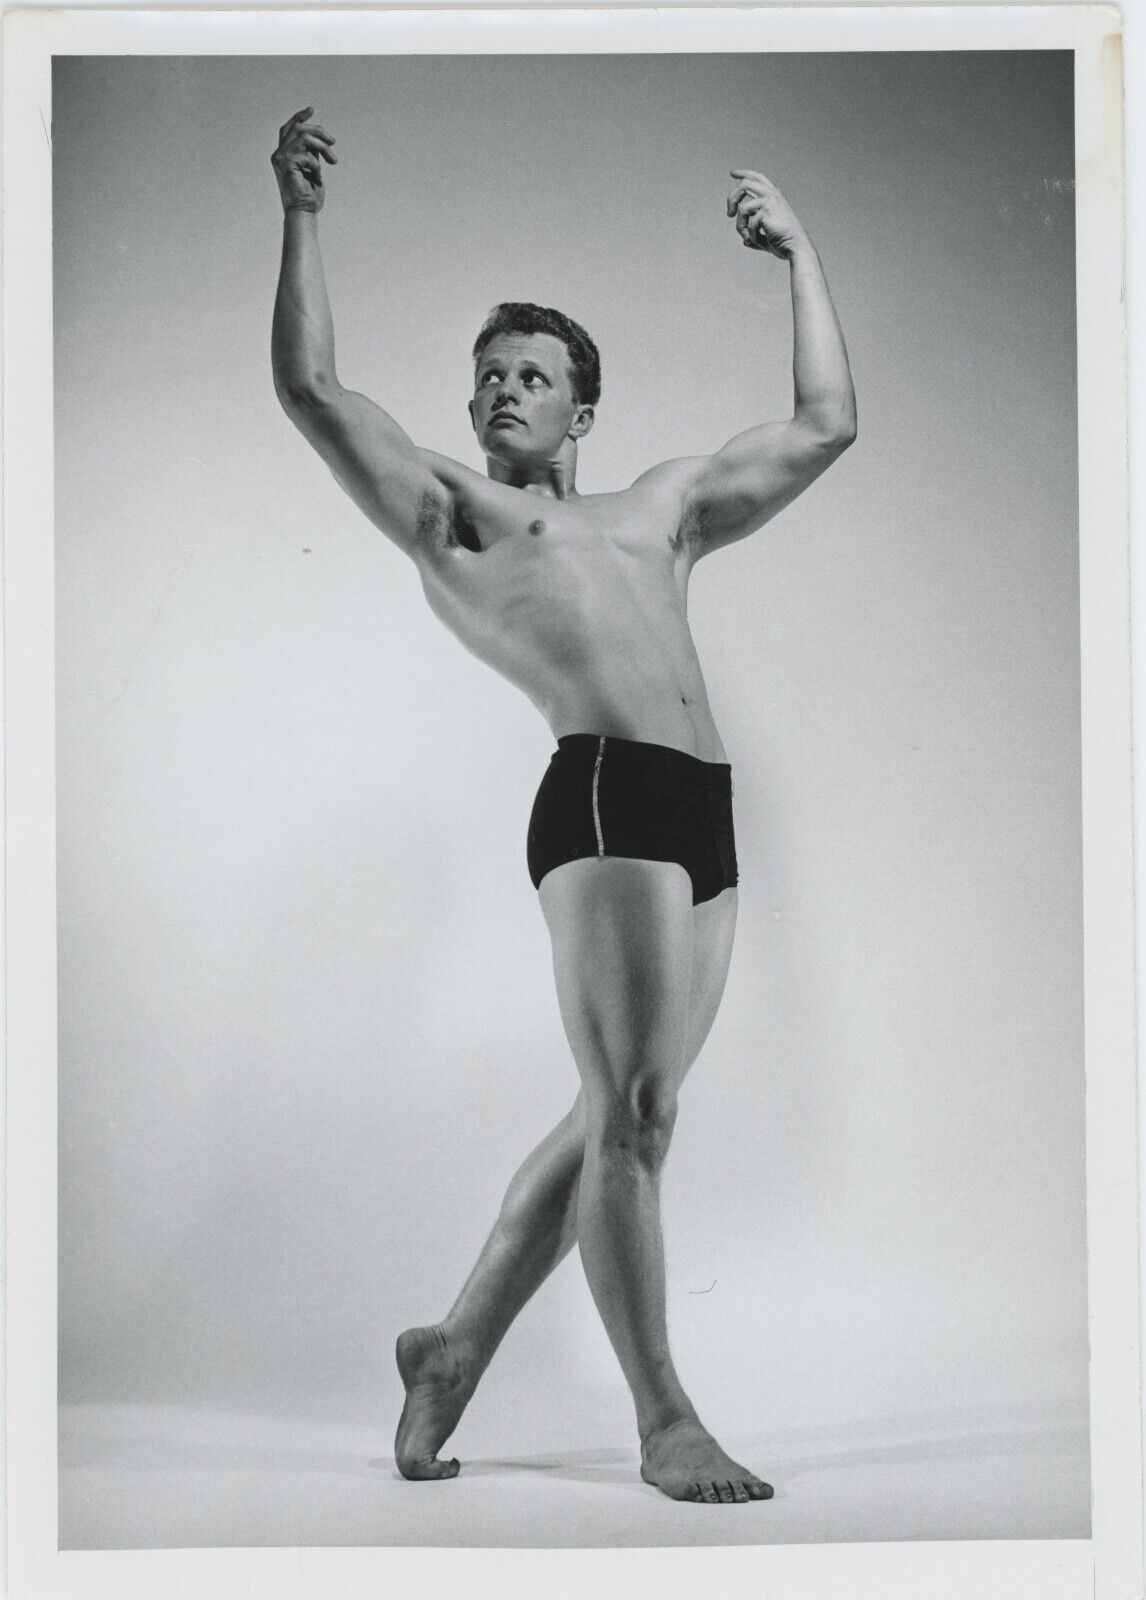 Vintage Male Physique BRUCE OF LA Body Builder Young Man GAY INTEREST c 1959